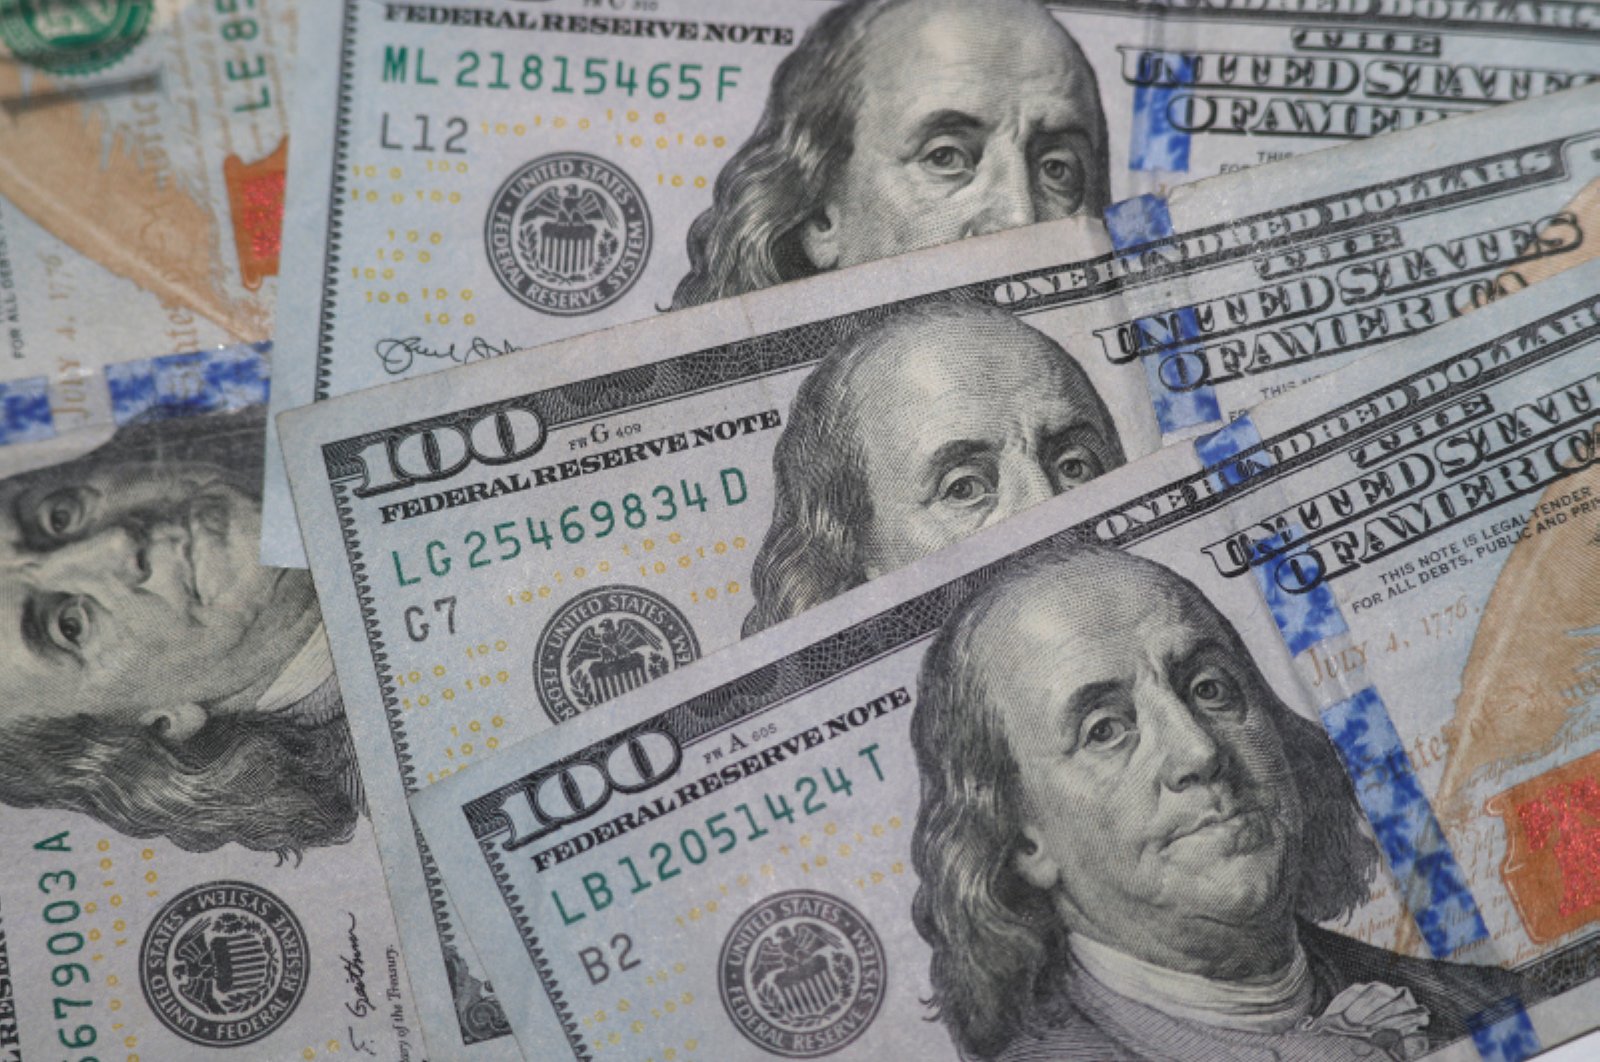 This Jan. 22, 2020, file photo shows the likeness of Benjamin Franklin on $100 bills in Dallas. (AP Photo)